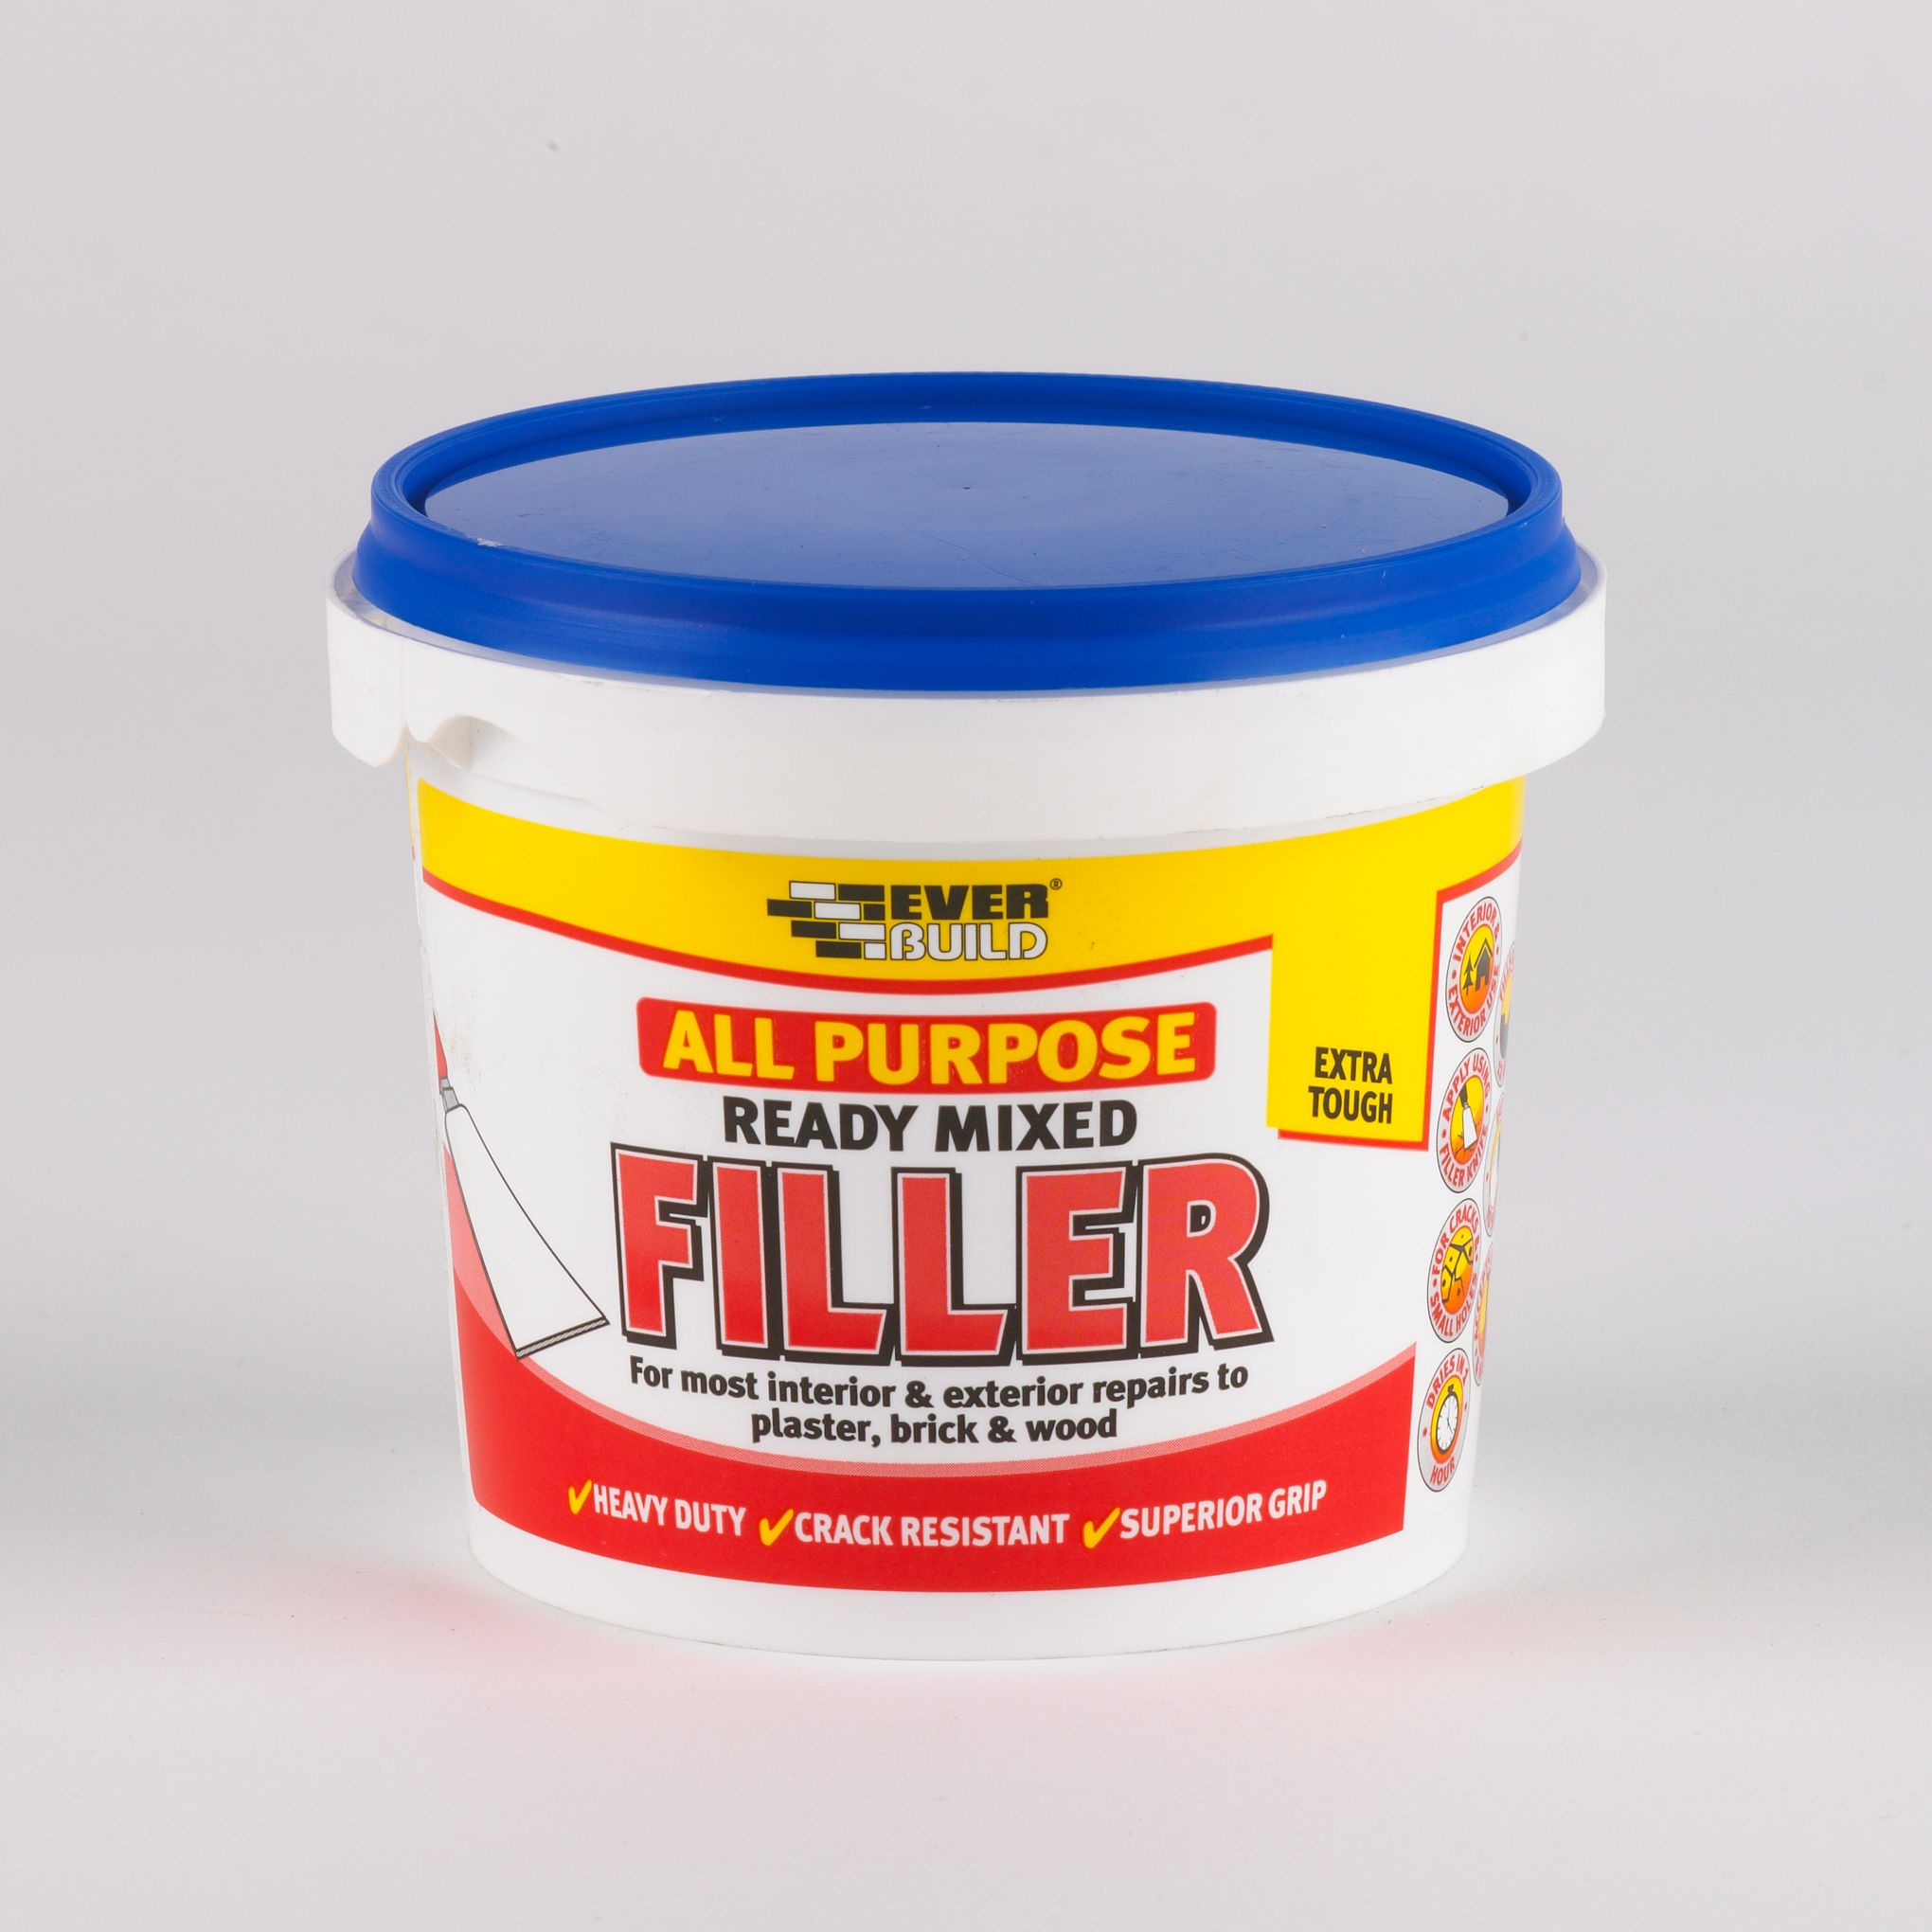 ALL PURPOSE READY MIXED FILLER 600G 